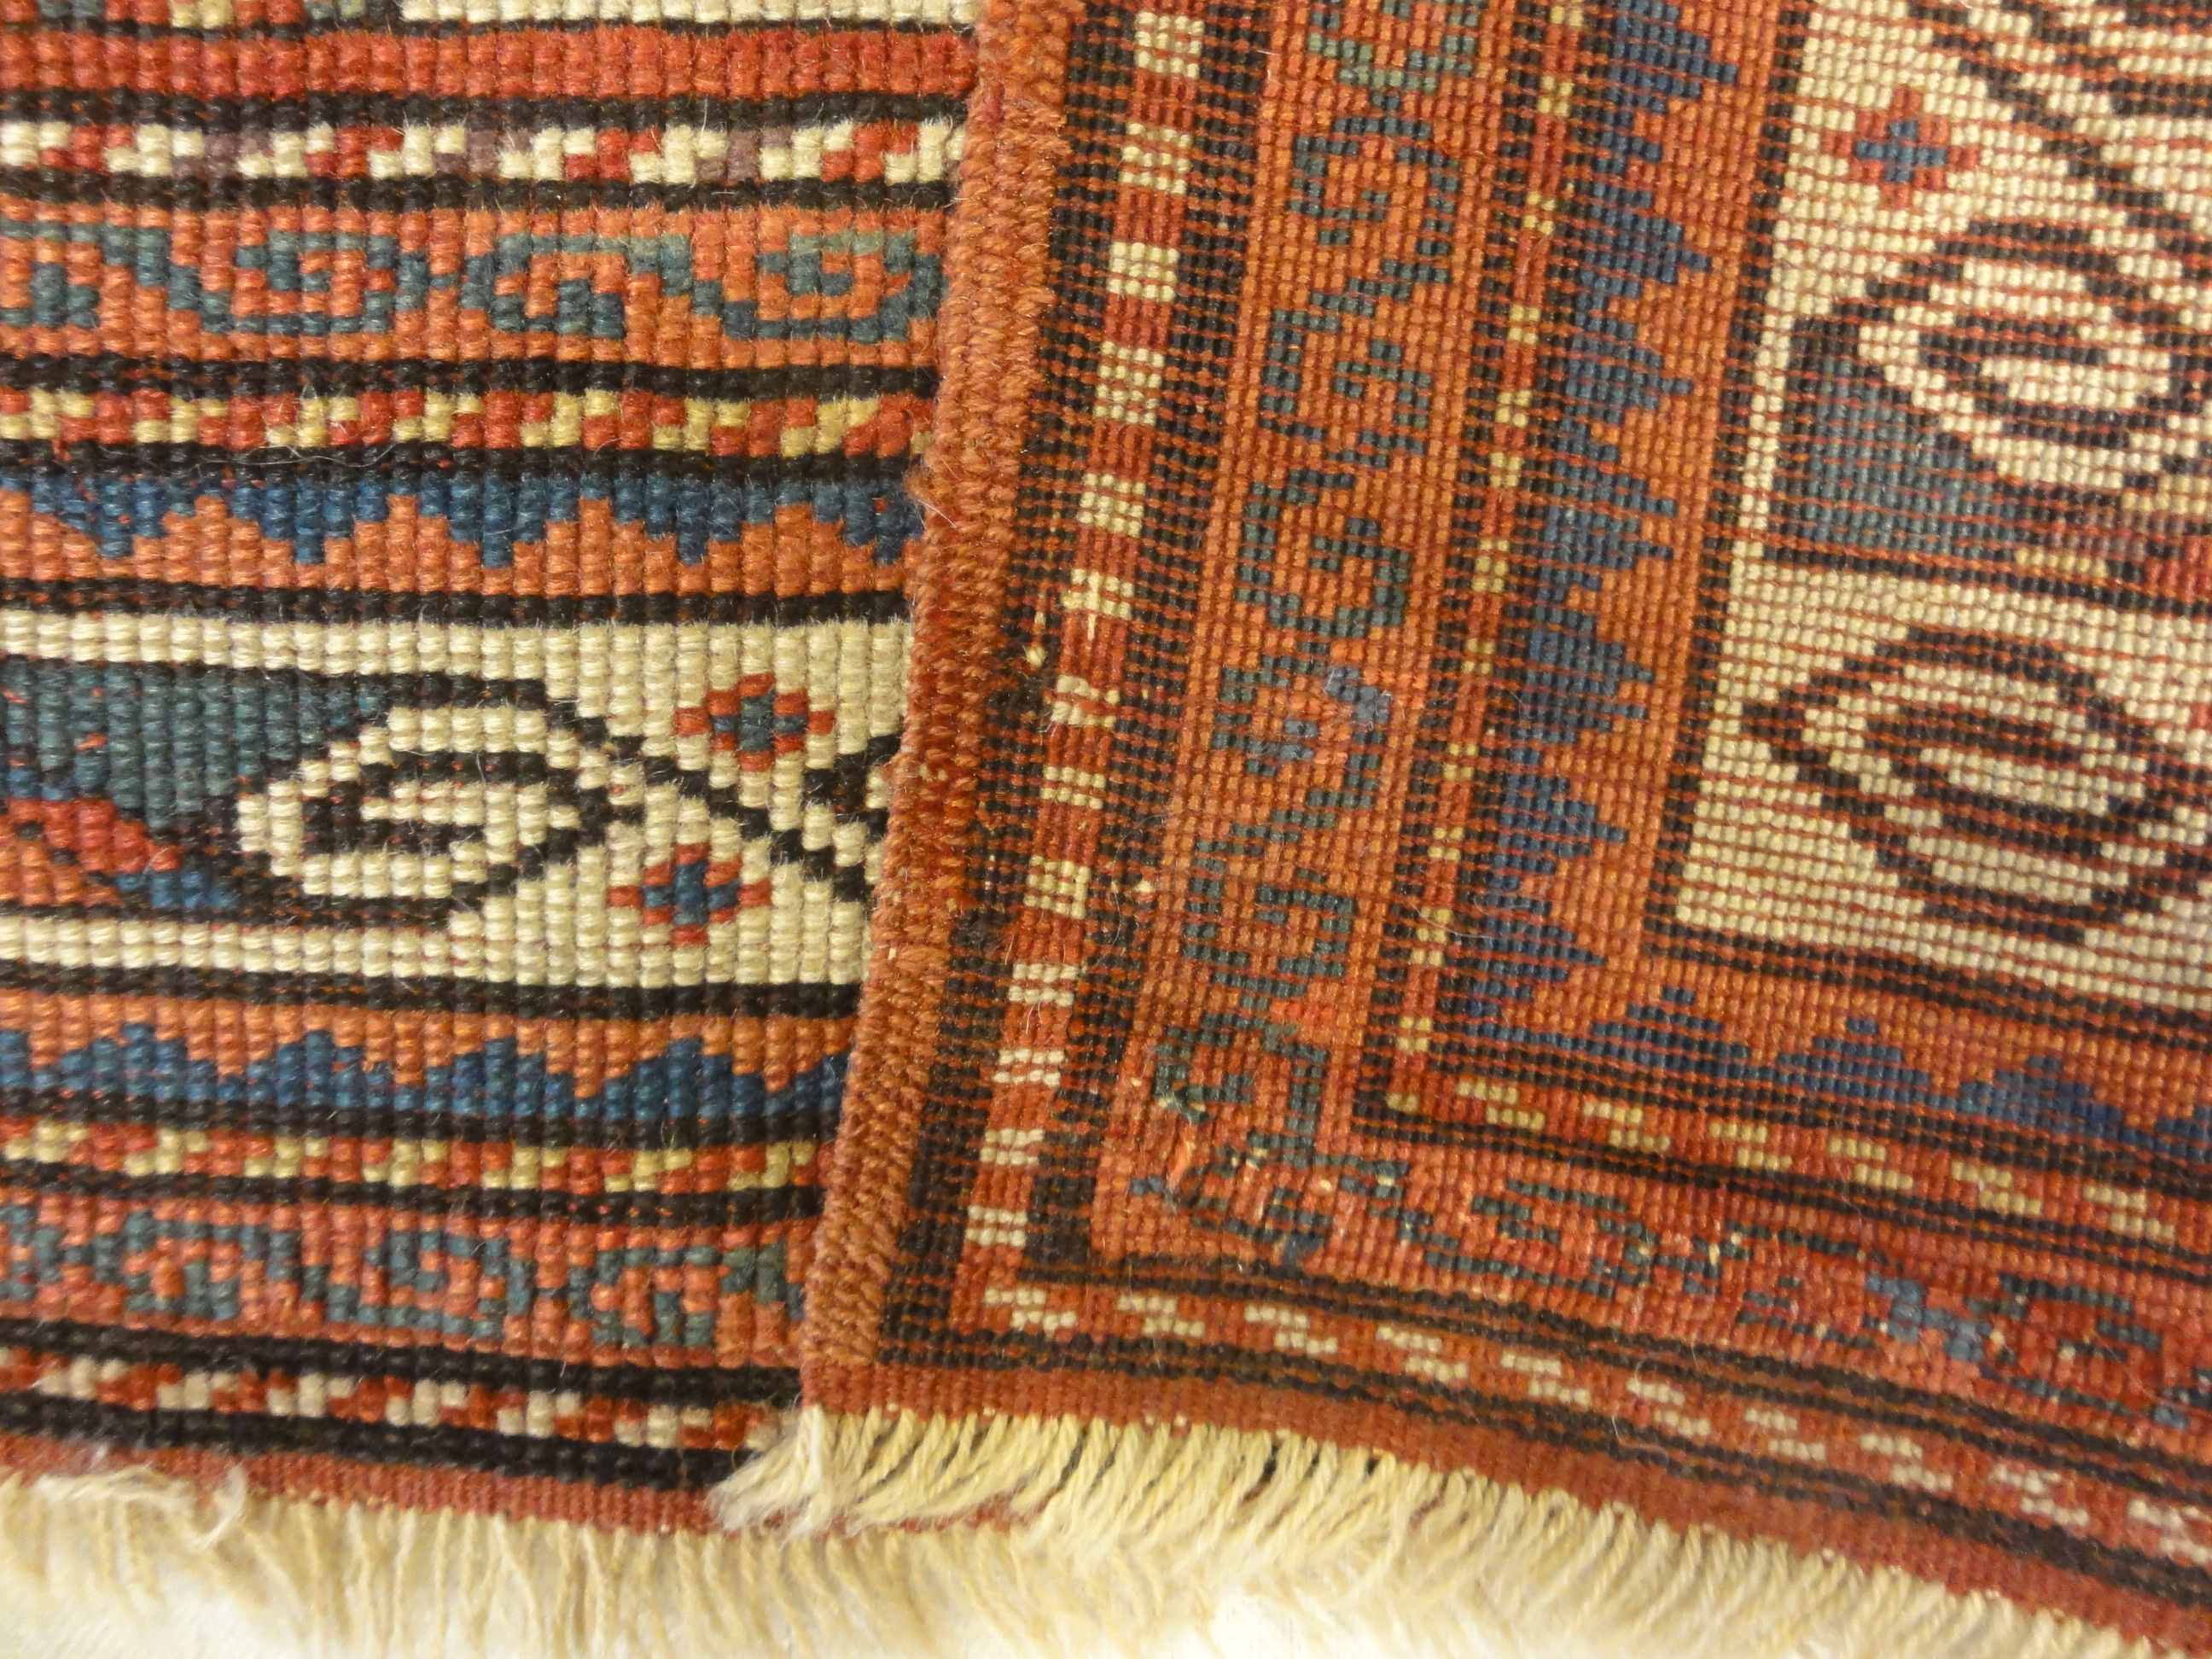 Finest Rare Museum Quality Caucasian Kazak Rug From the Early 19th Century. Genuine Woven Carpet Art. Santa Barbara Design Center Rugs and More.